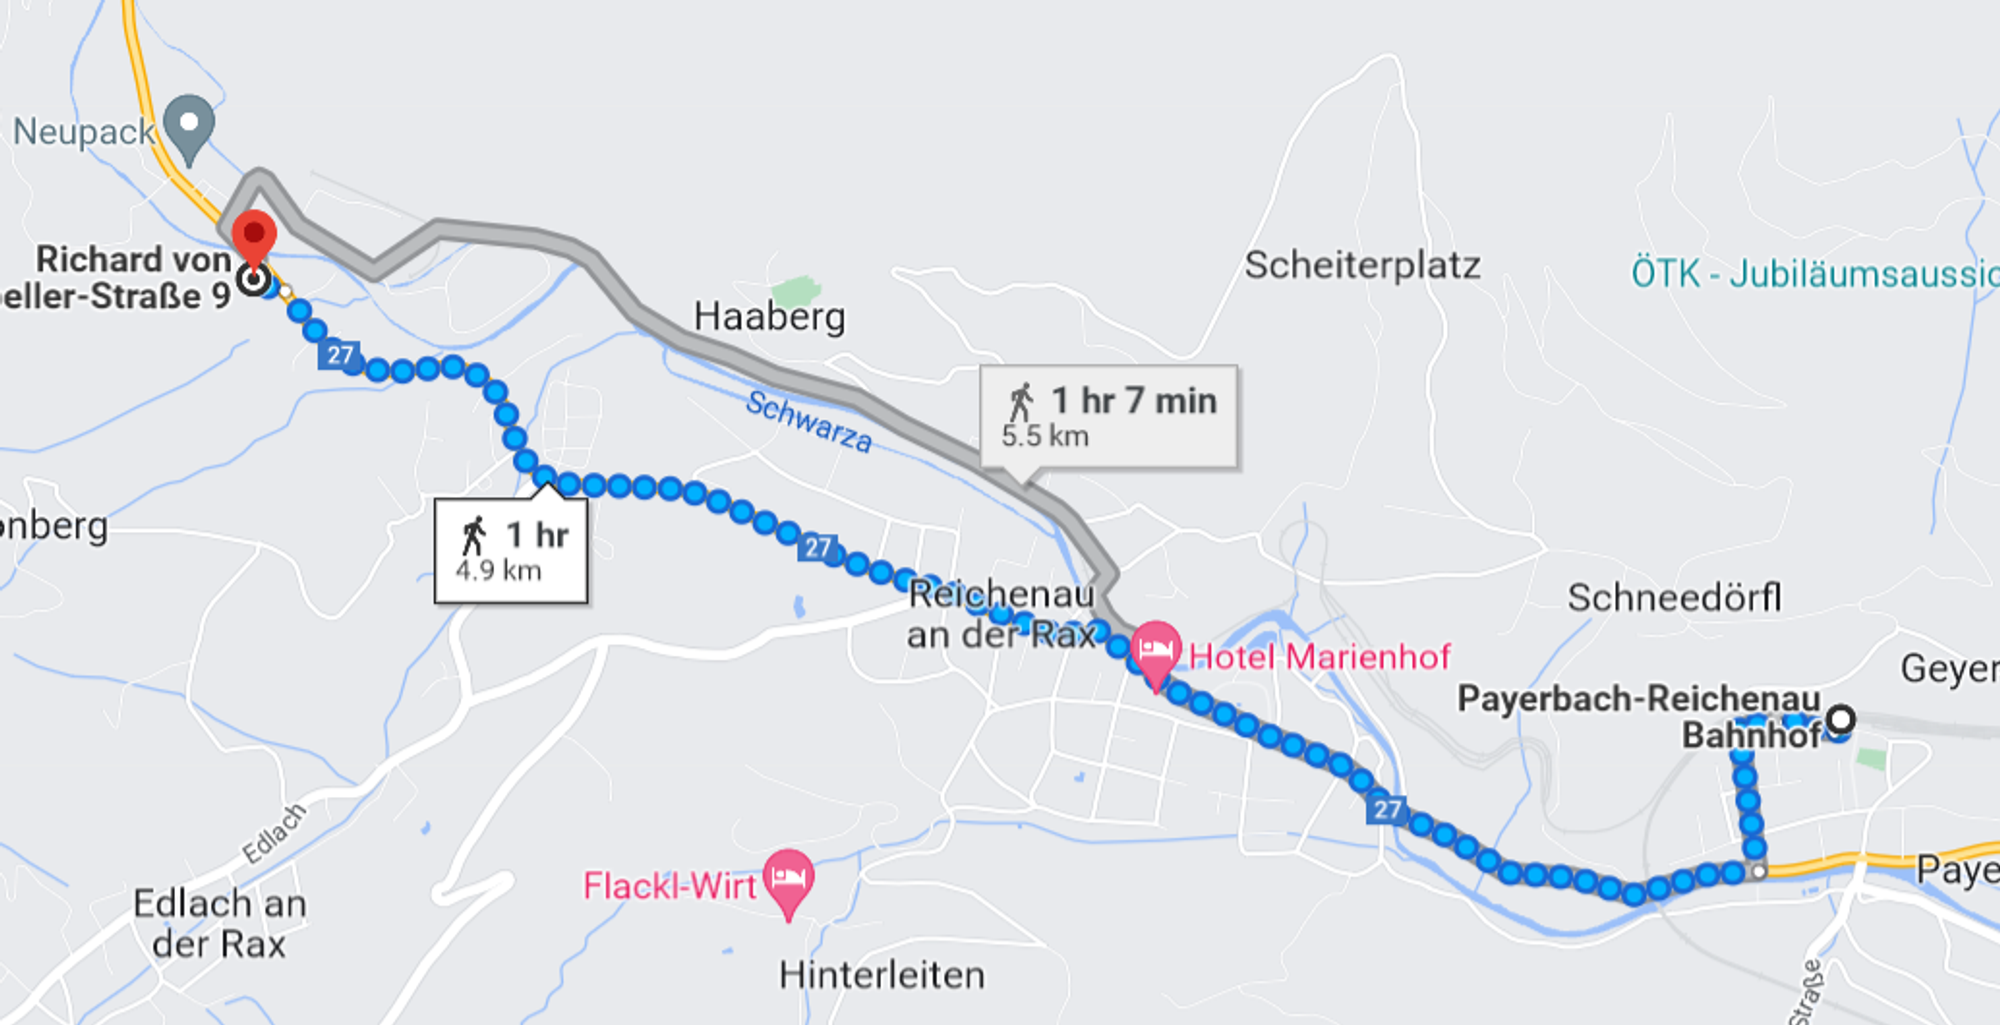 Fastest walking routes from Payerbach-Reichenau Station to the Hub.